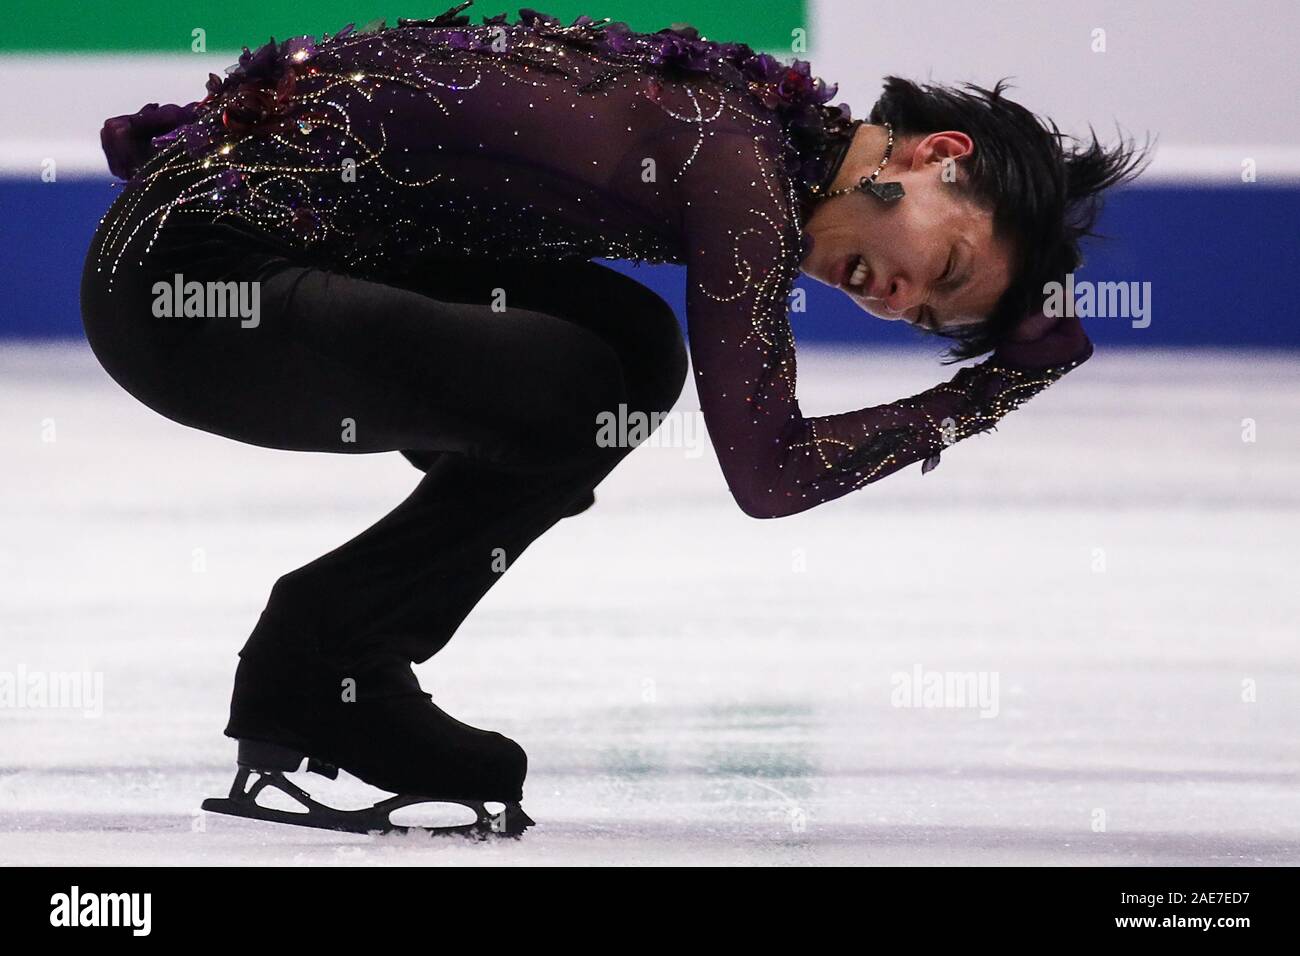 Turin, Italy. 07th Dec, 2019. TURIN, ITALY - DECEMBER 7, 2019: Figure skater  Yuzuru Hanyu of Japan performs a sit spin during a men's free skating event  at the 2019-20 ISU Grand